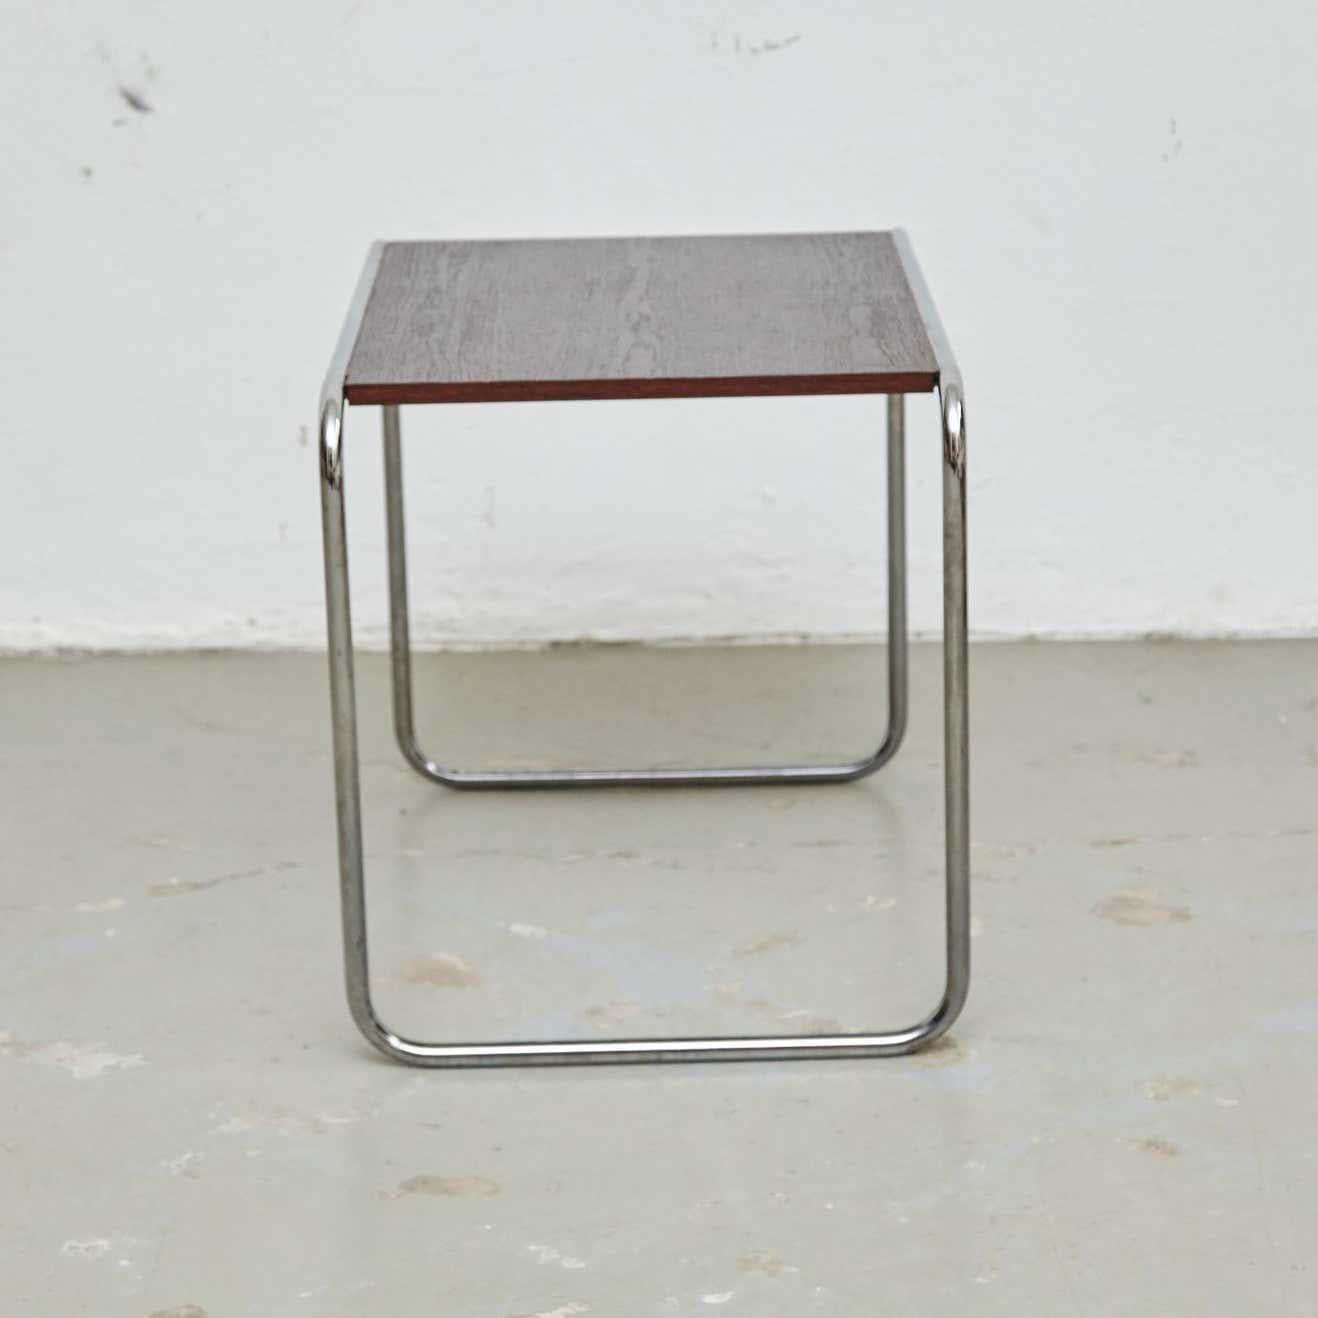 Bauhaus Marcel Breuer Wood and Steel Table by Gavina, circa 1960 For Sale